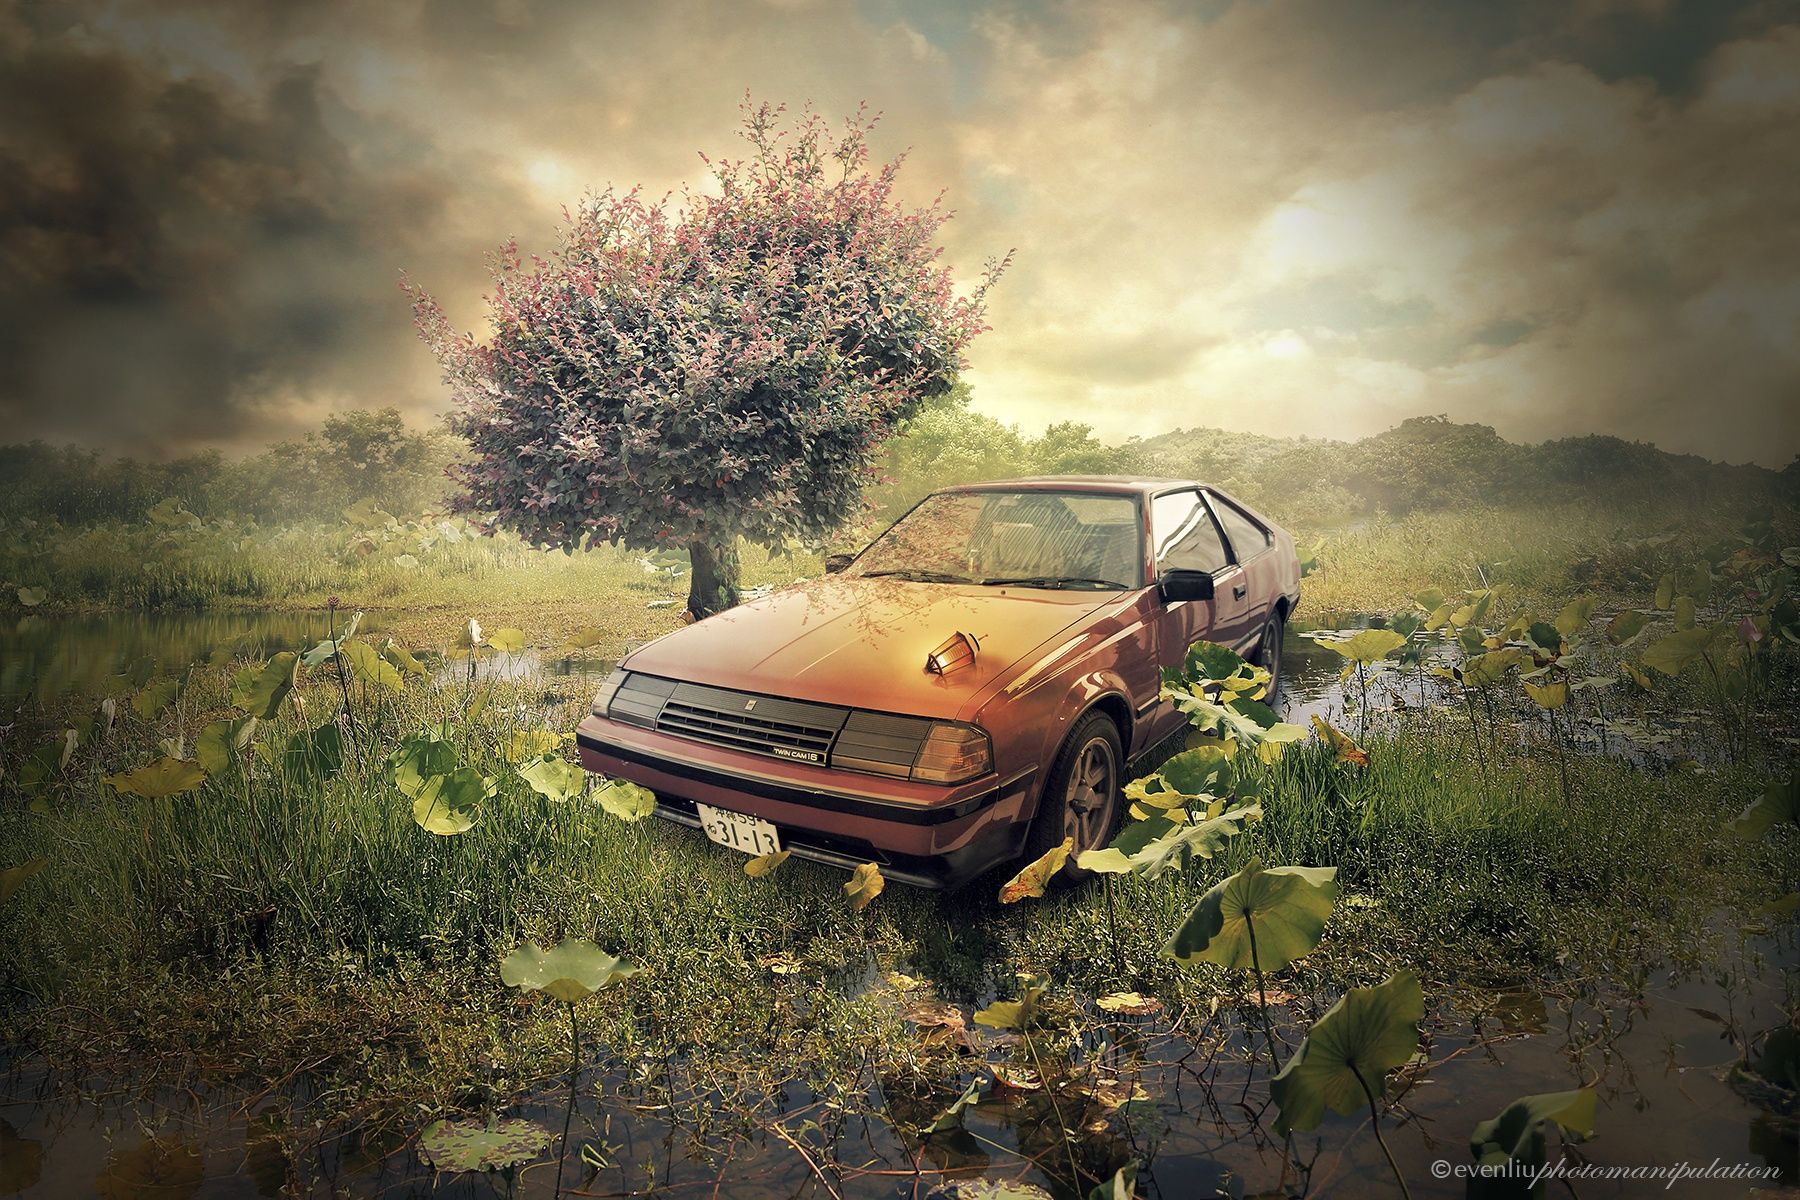 The Car By Evenliu Photomanipulation On 500px Magical Image Of